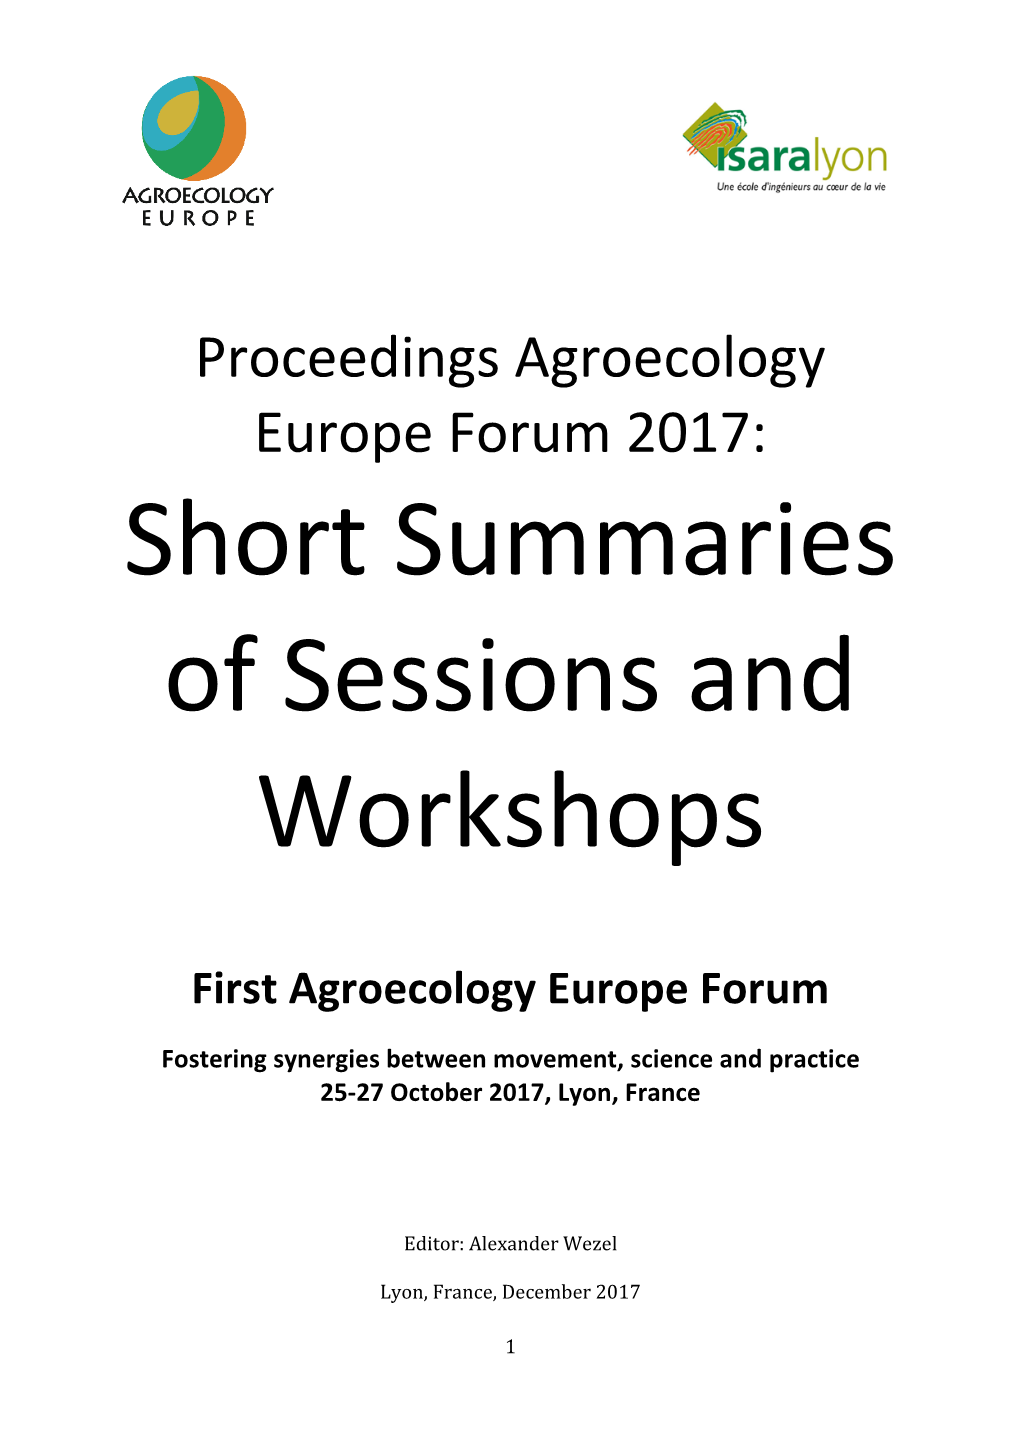 Short Summaries of Sessions and Workshops